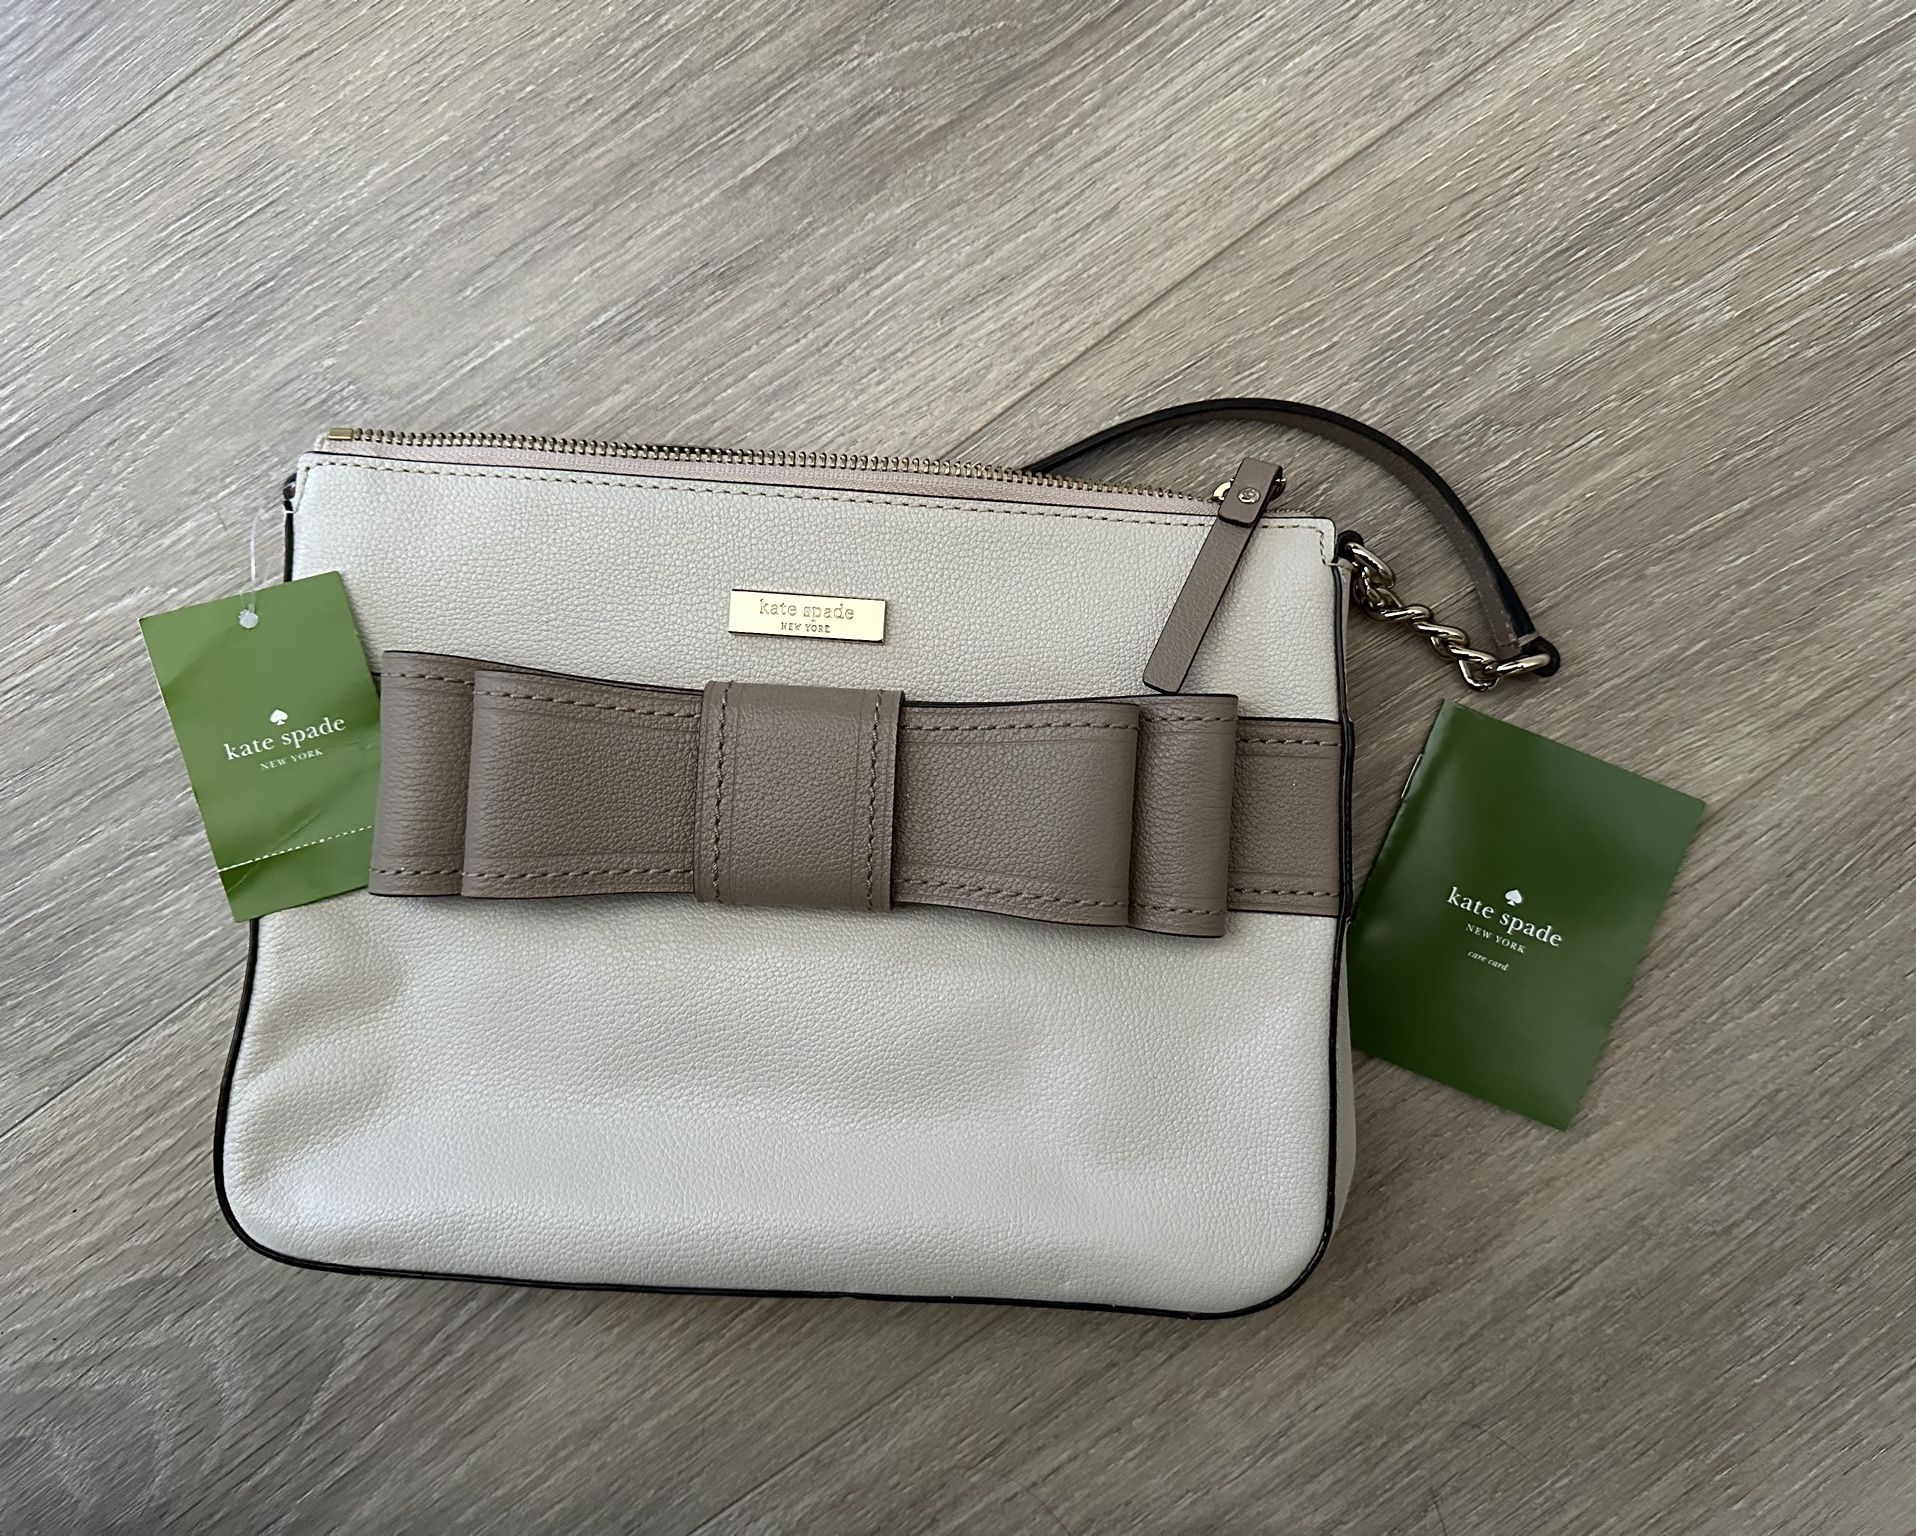 Kate Spade New York Crossbody Beige with Taupe Bow